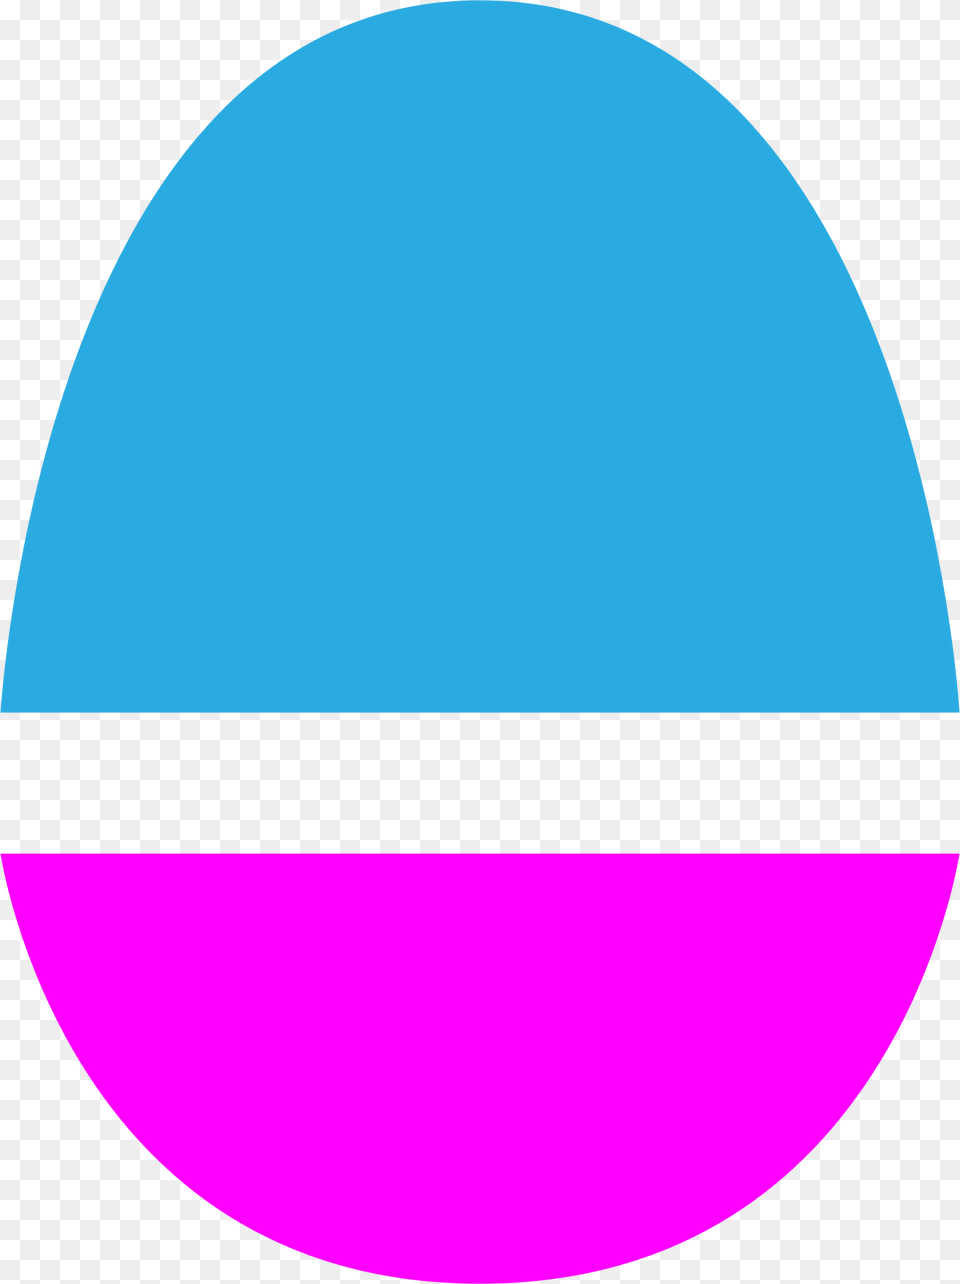 Magenta And Blue Egg Clip Art, Sphere, Astronomy, Moon, Nature Png